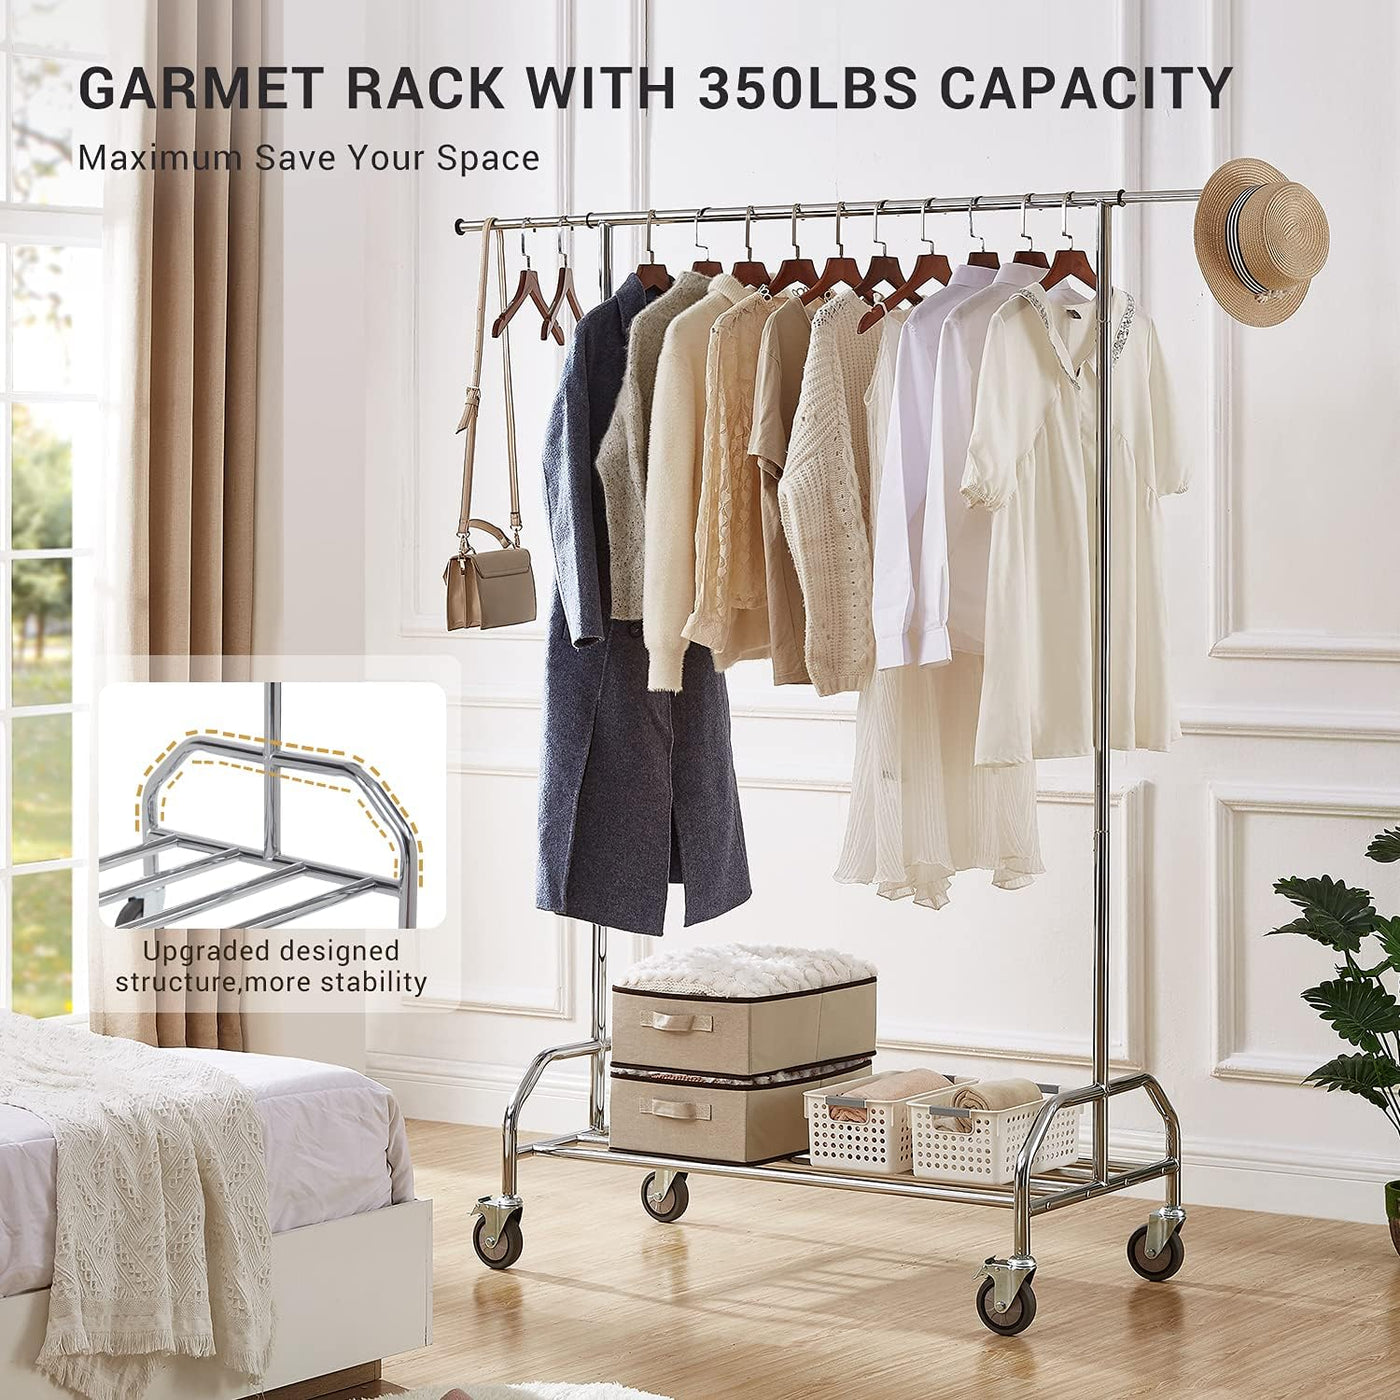 Clothing Racks for Hanging Clothes,Heavy Duty Clothes Rack,Garment